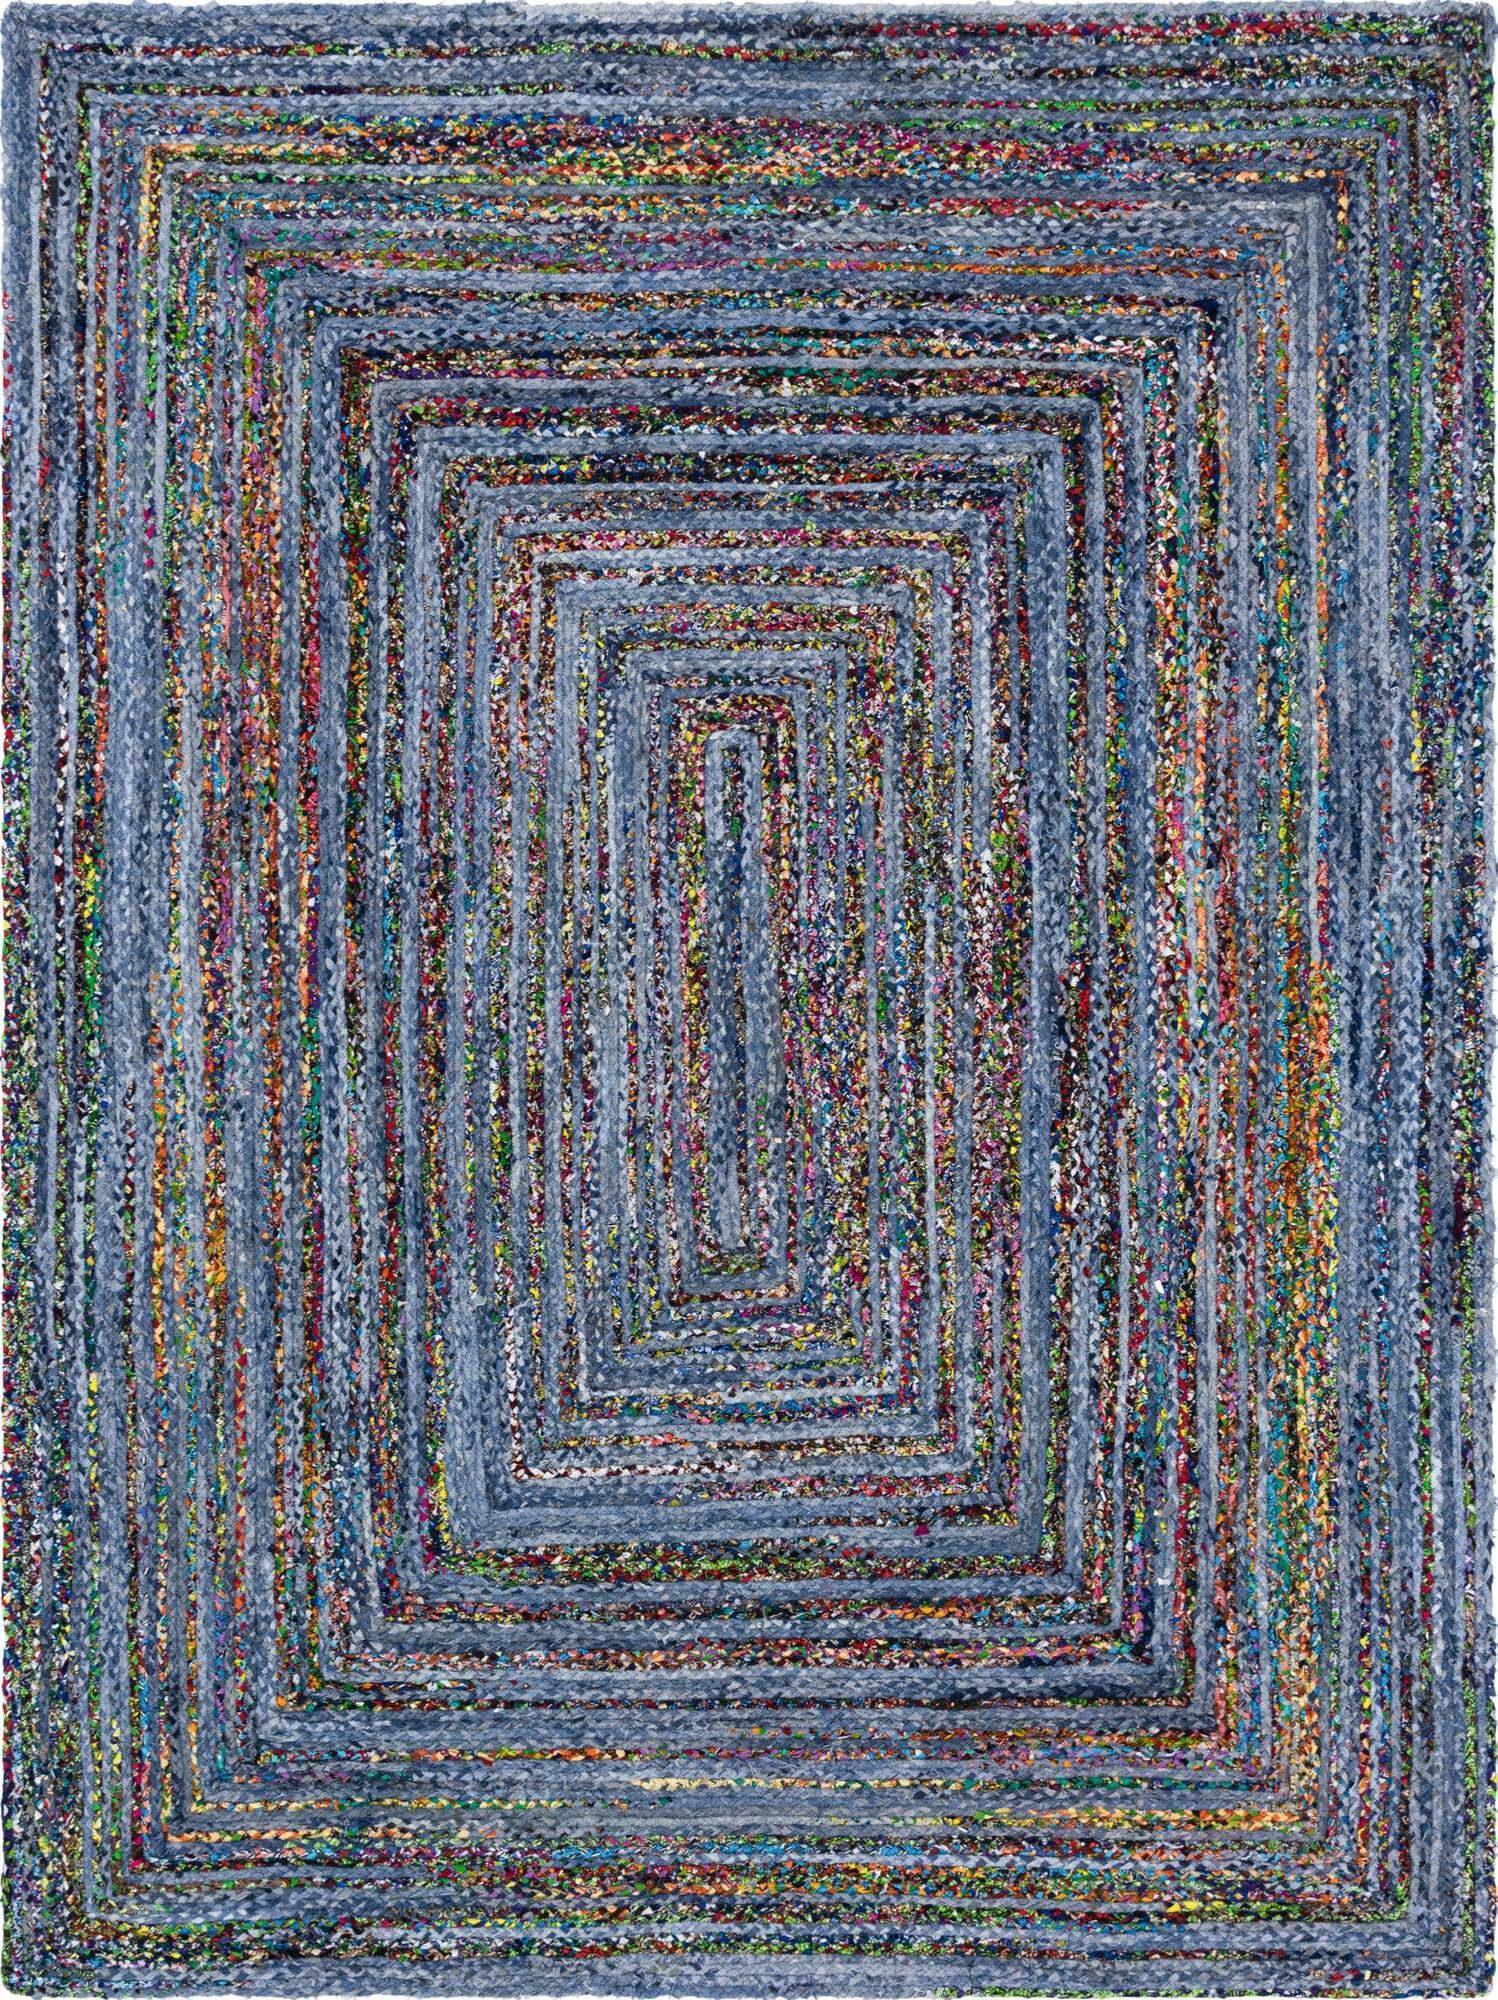 Unique Loom Indoor Rugs - Braided Chindi Abstract Rectangular 9x12 Rug Blue & Multi